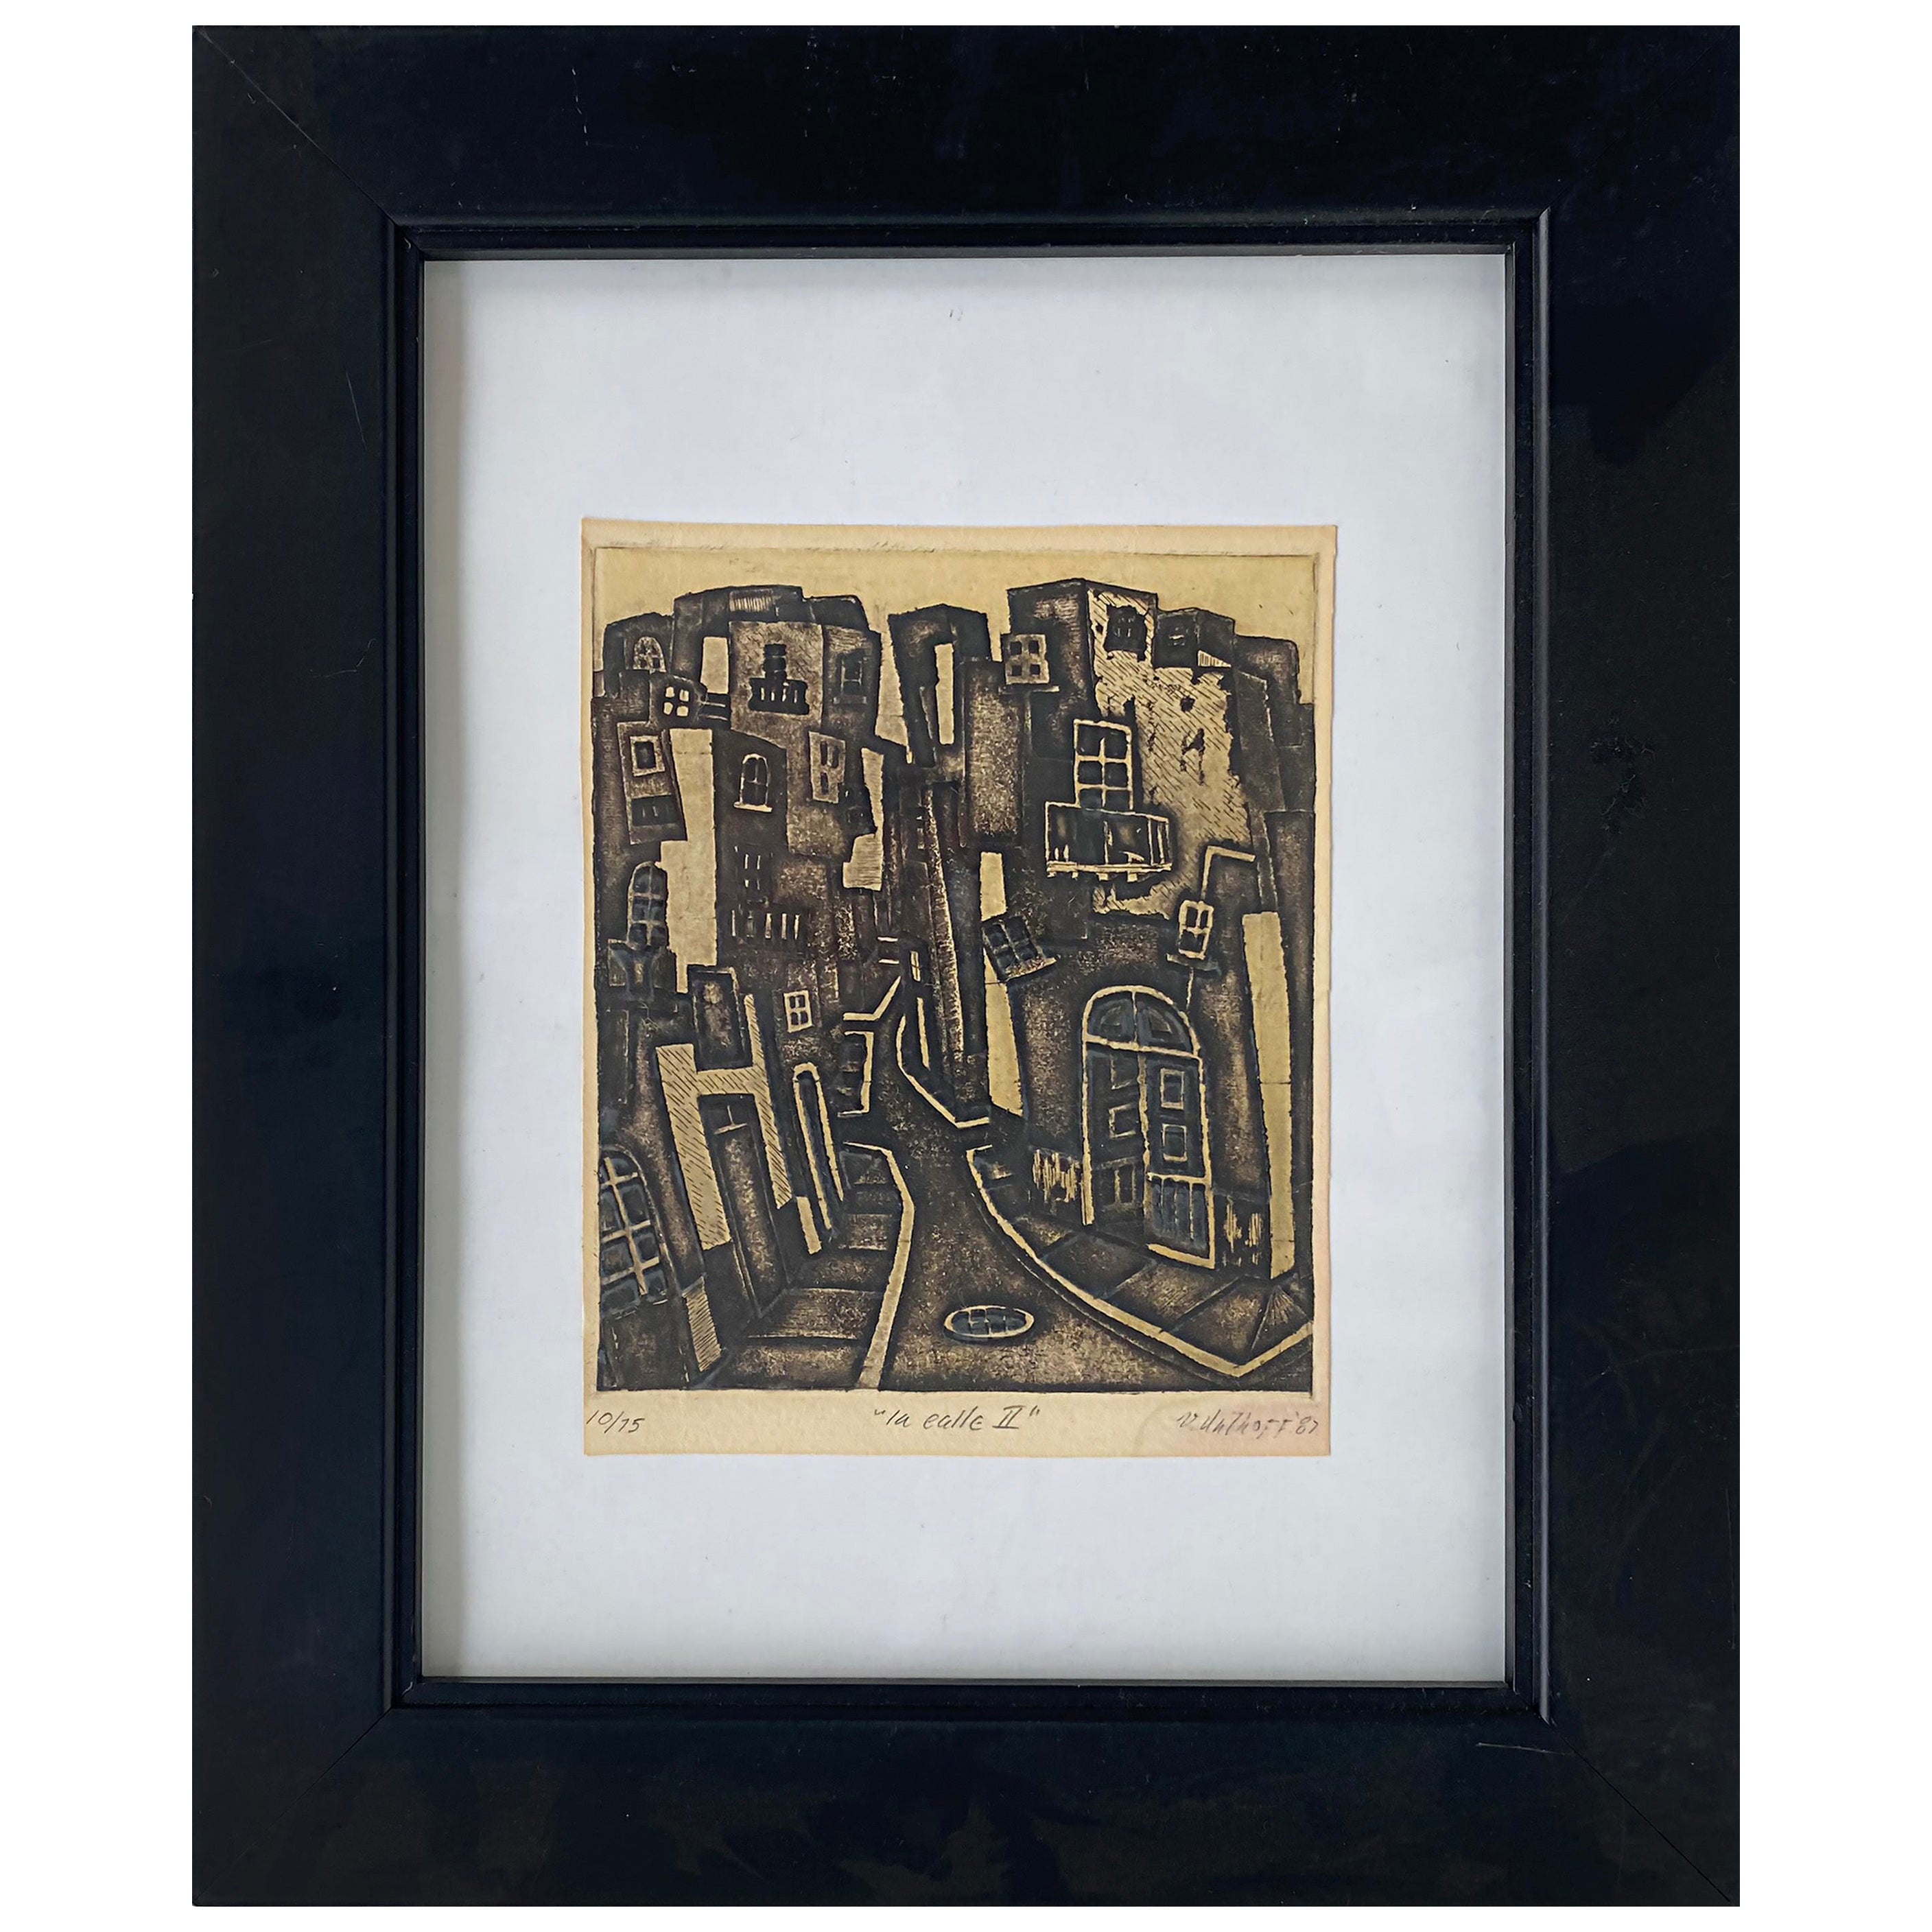 Woodblock Engraving “La Calle II" Signed, Numbered 10/75, 1987 For Sale